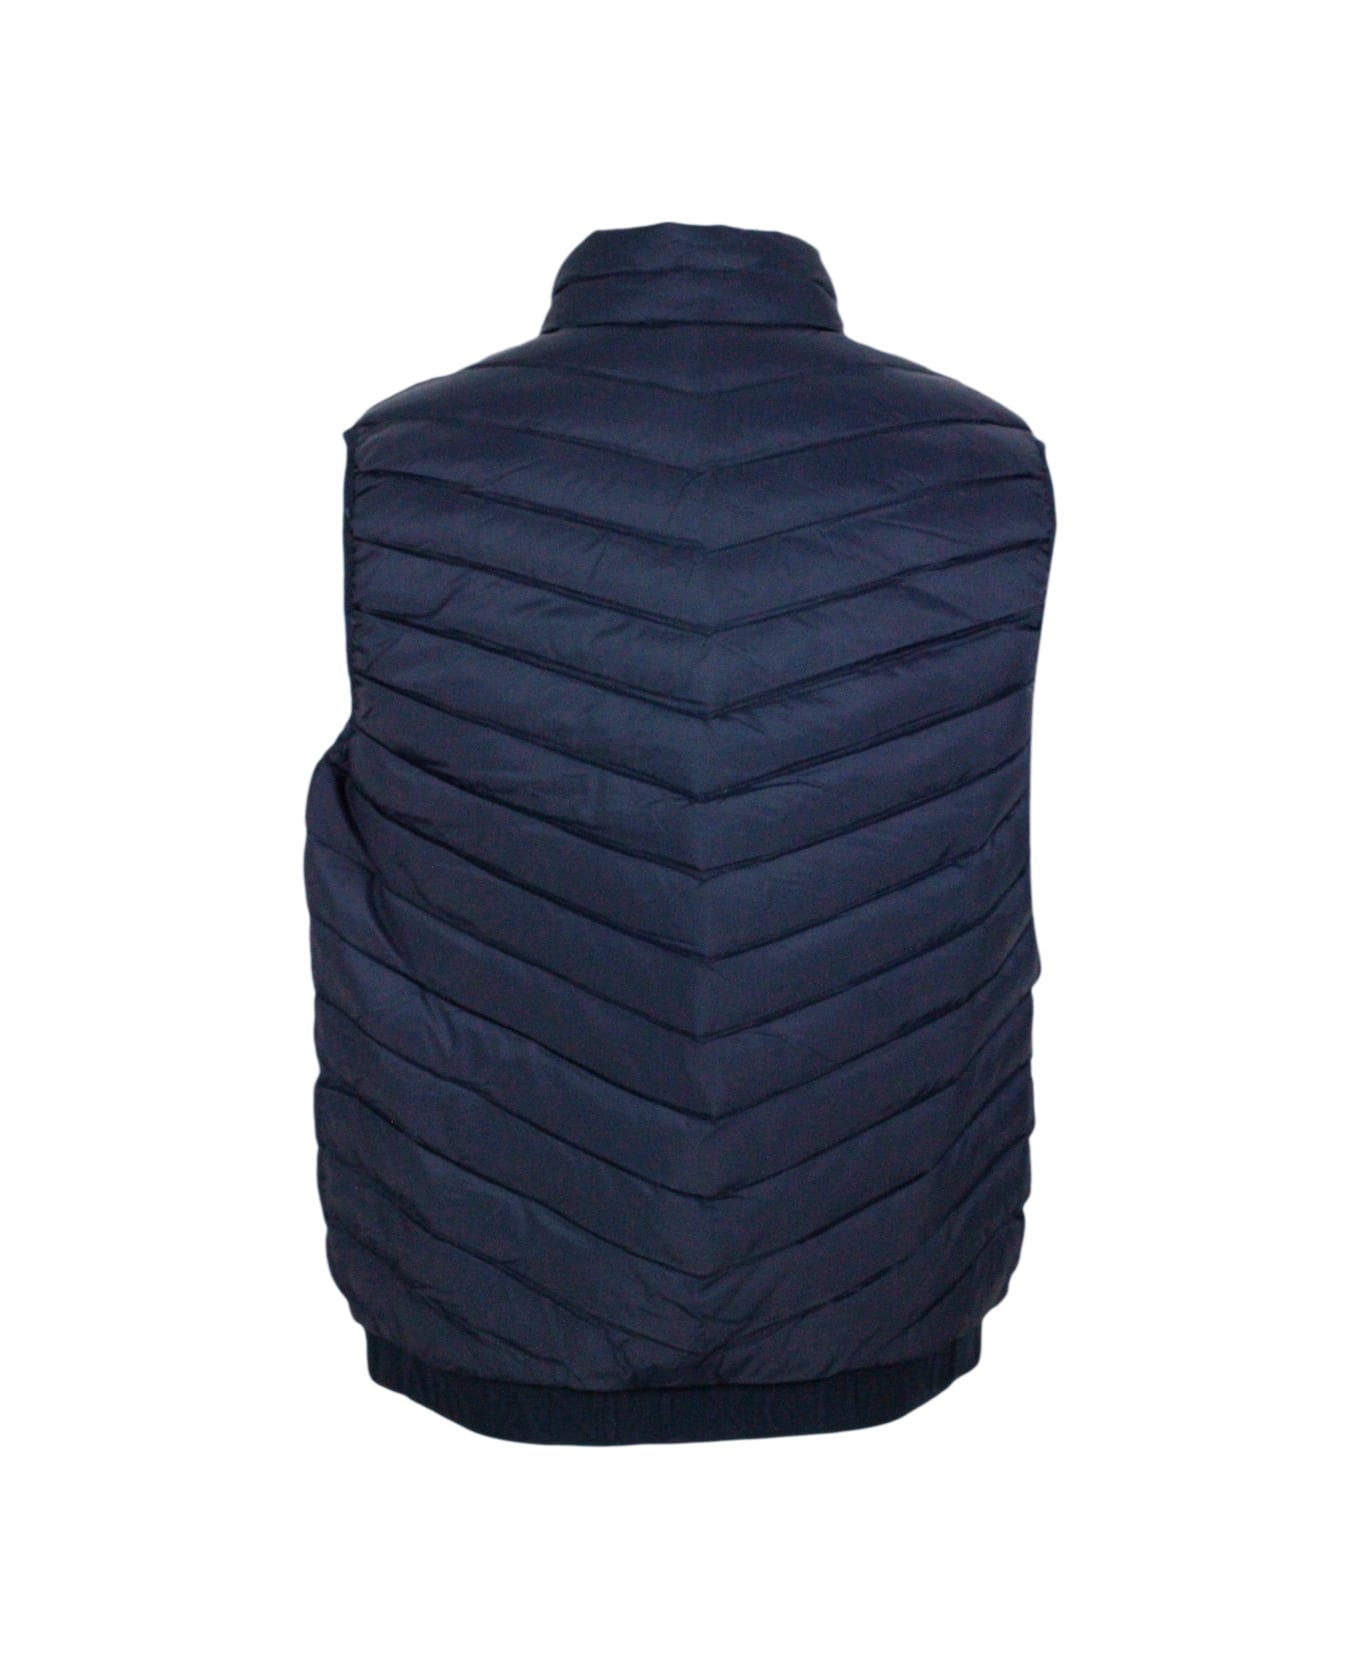 Armani Collezioni Sleeveless sneakersy In Light Down Jacket With Logoed And Elasticated Bottom And Zip Closure - Blu